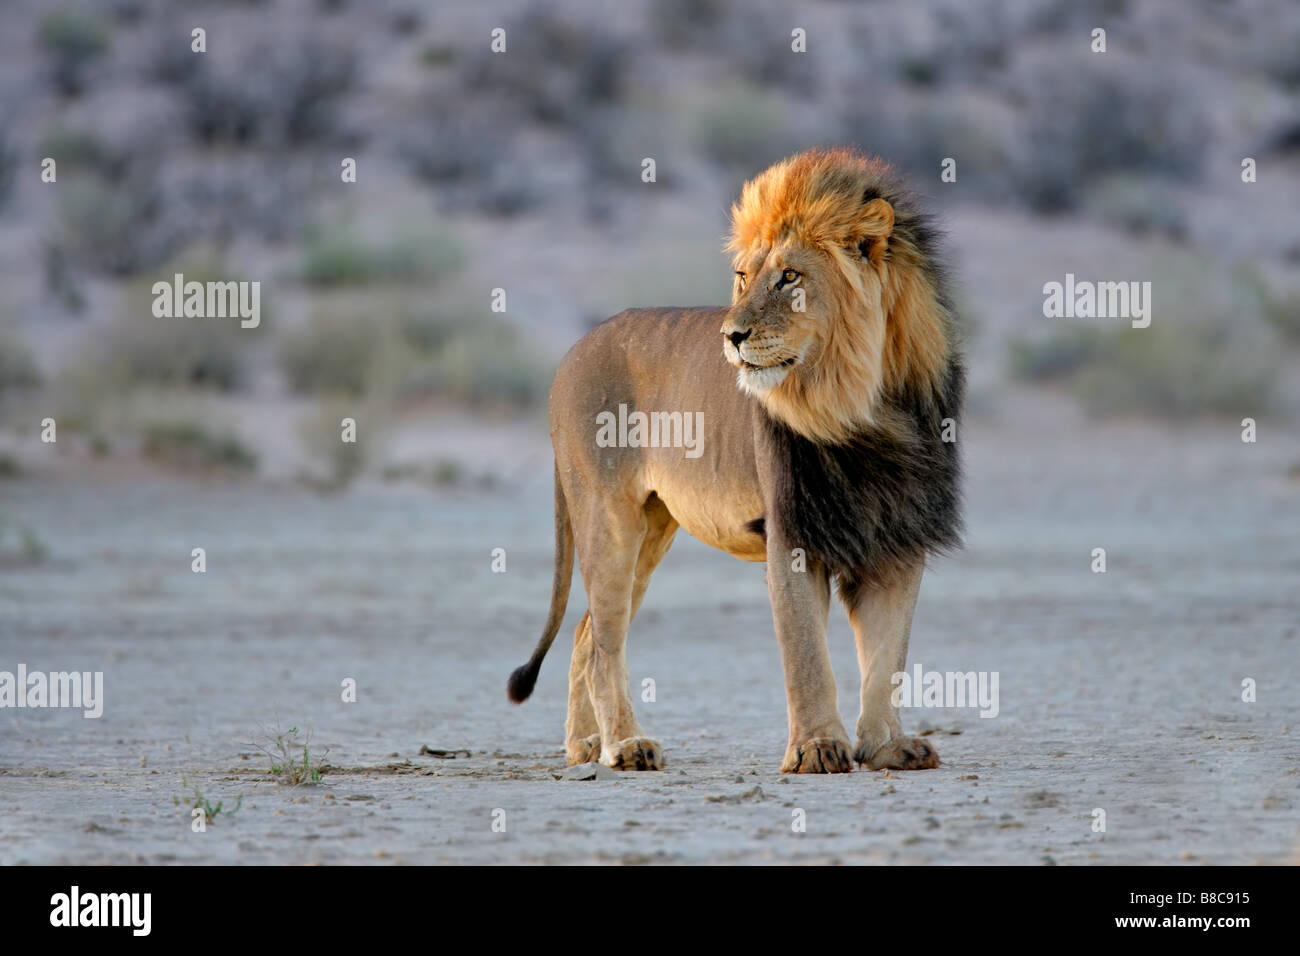 Big male African lion (Panthera leo), in late afternoon light, Kgalagadi Transfrontier Park, South Africa Stock Photo